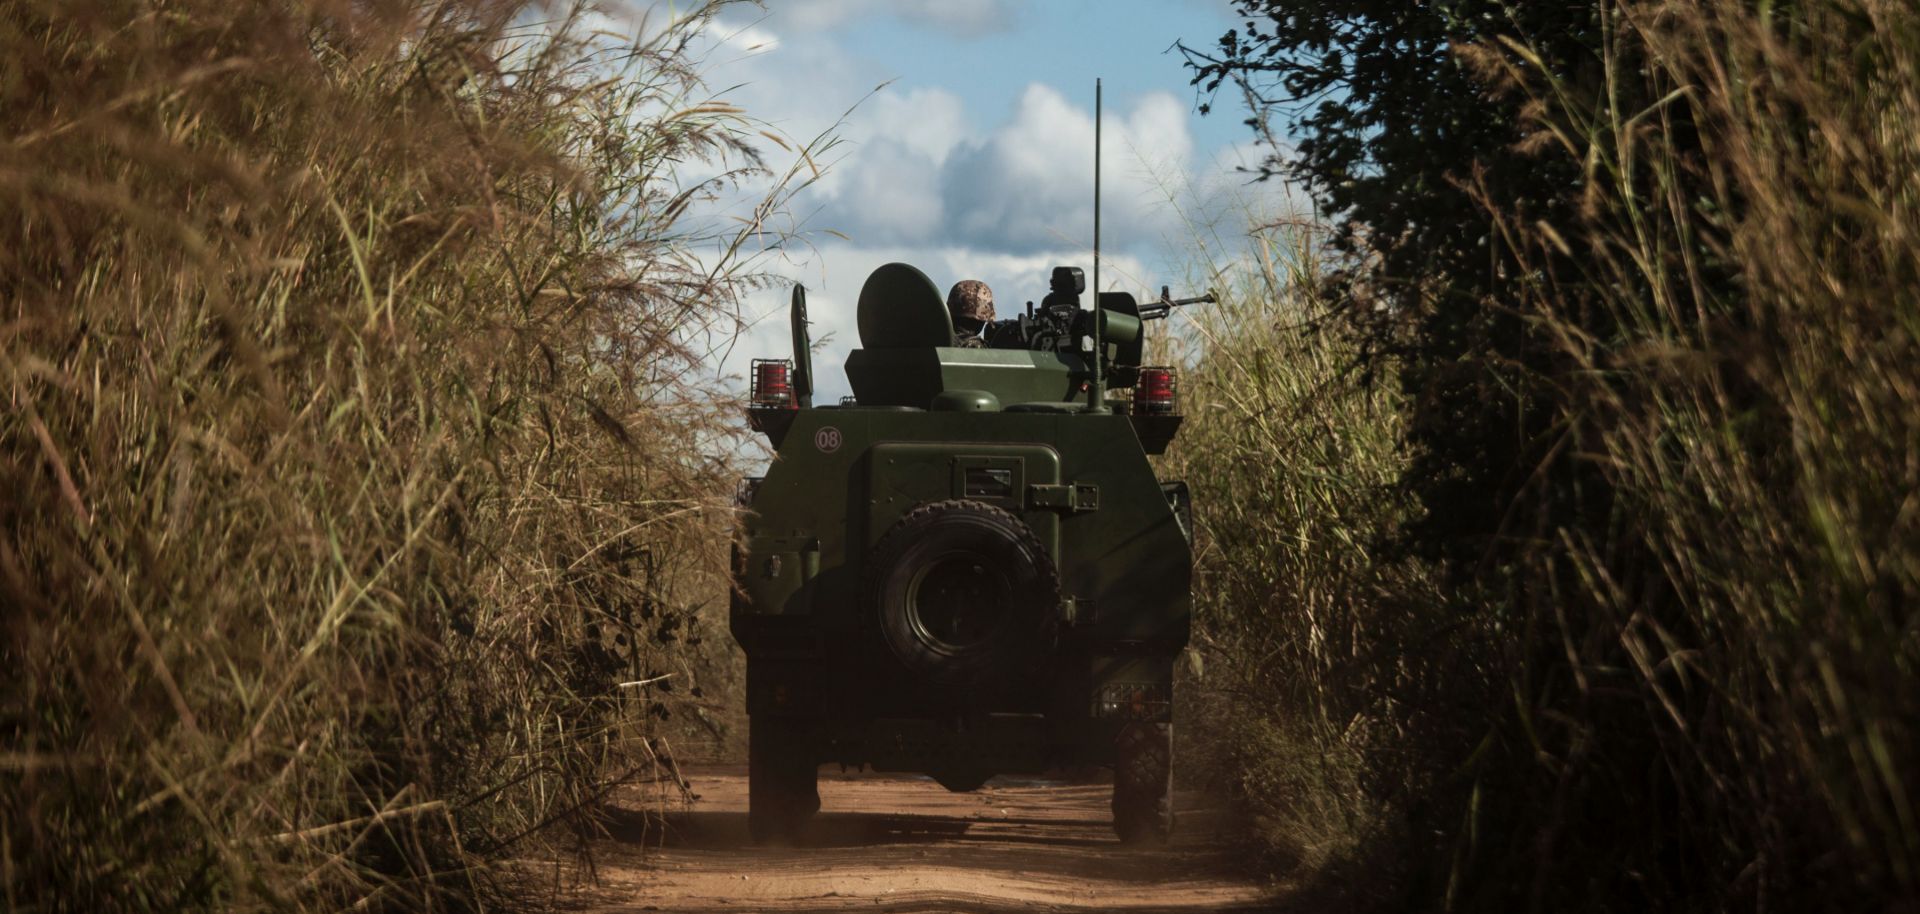 Army vehicles patrol the roads on the outskirts of a village in northern Mozambique on May 26, 2016. 